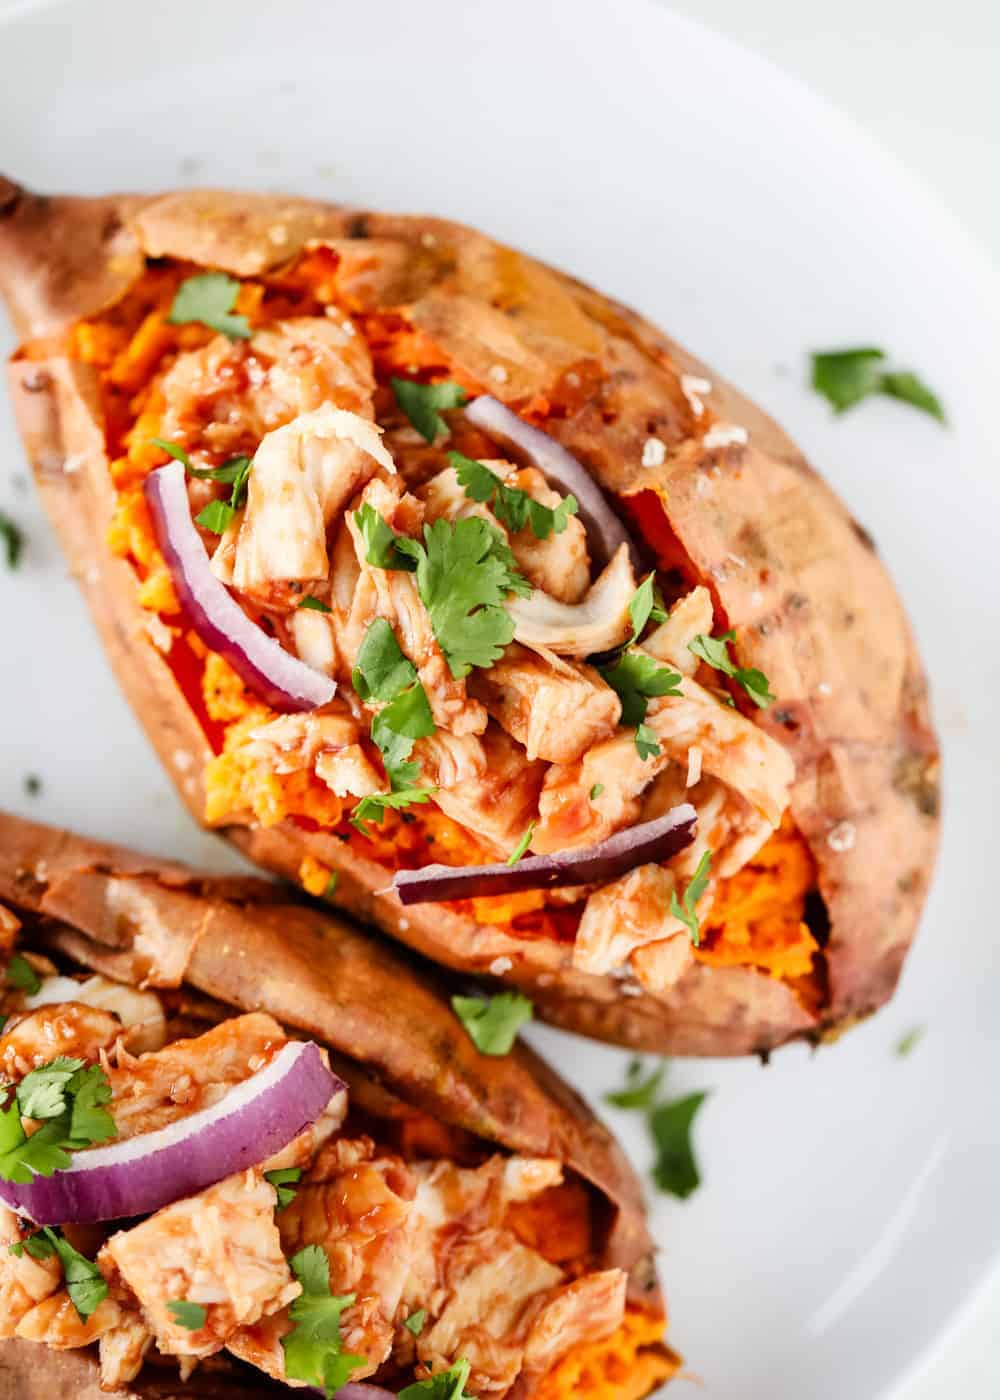 BBQ chicken stuffed sweet potato with cilantro and red onion.